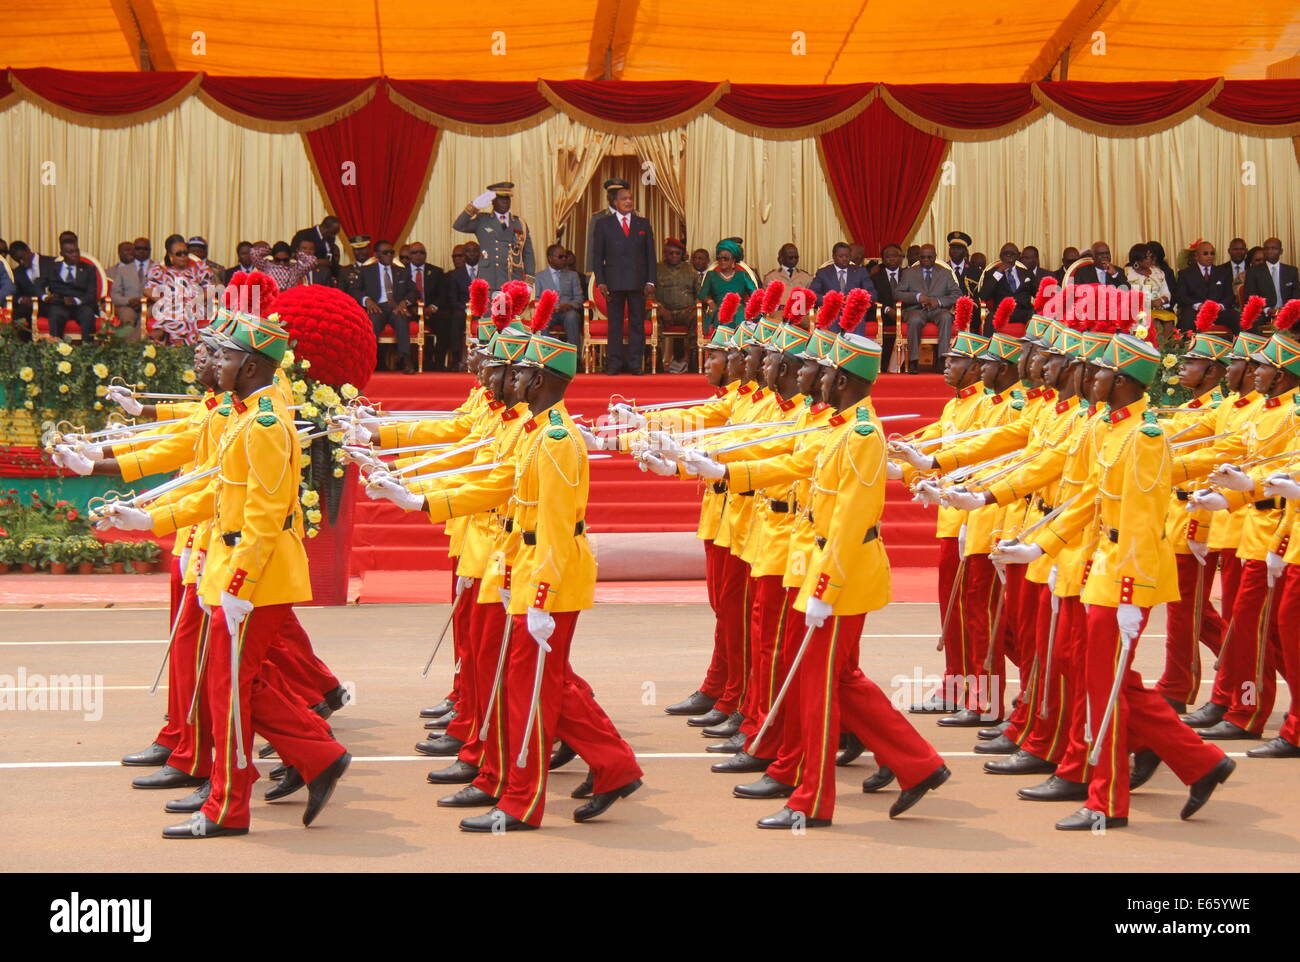 (140815) -- SIBITI (REPUBLIC OF CONGO), Aug. 15, 2014 (Xinhua) -- Soldiers march during a celebration marking the 54th independence anniversary of the country in Sibiti, the Republic of Congo, Aug. 15, 2014. (Xinhua/Liu Kai) Stock Photo